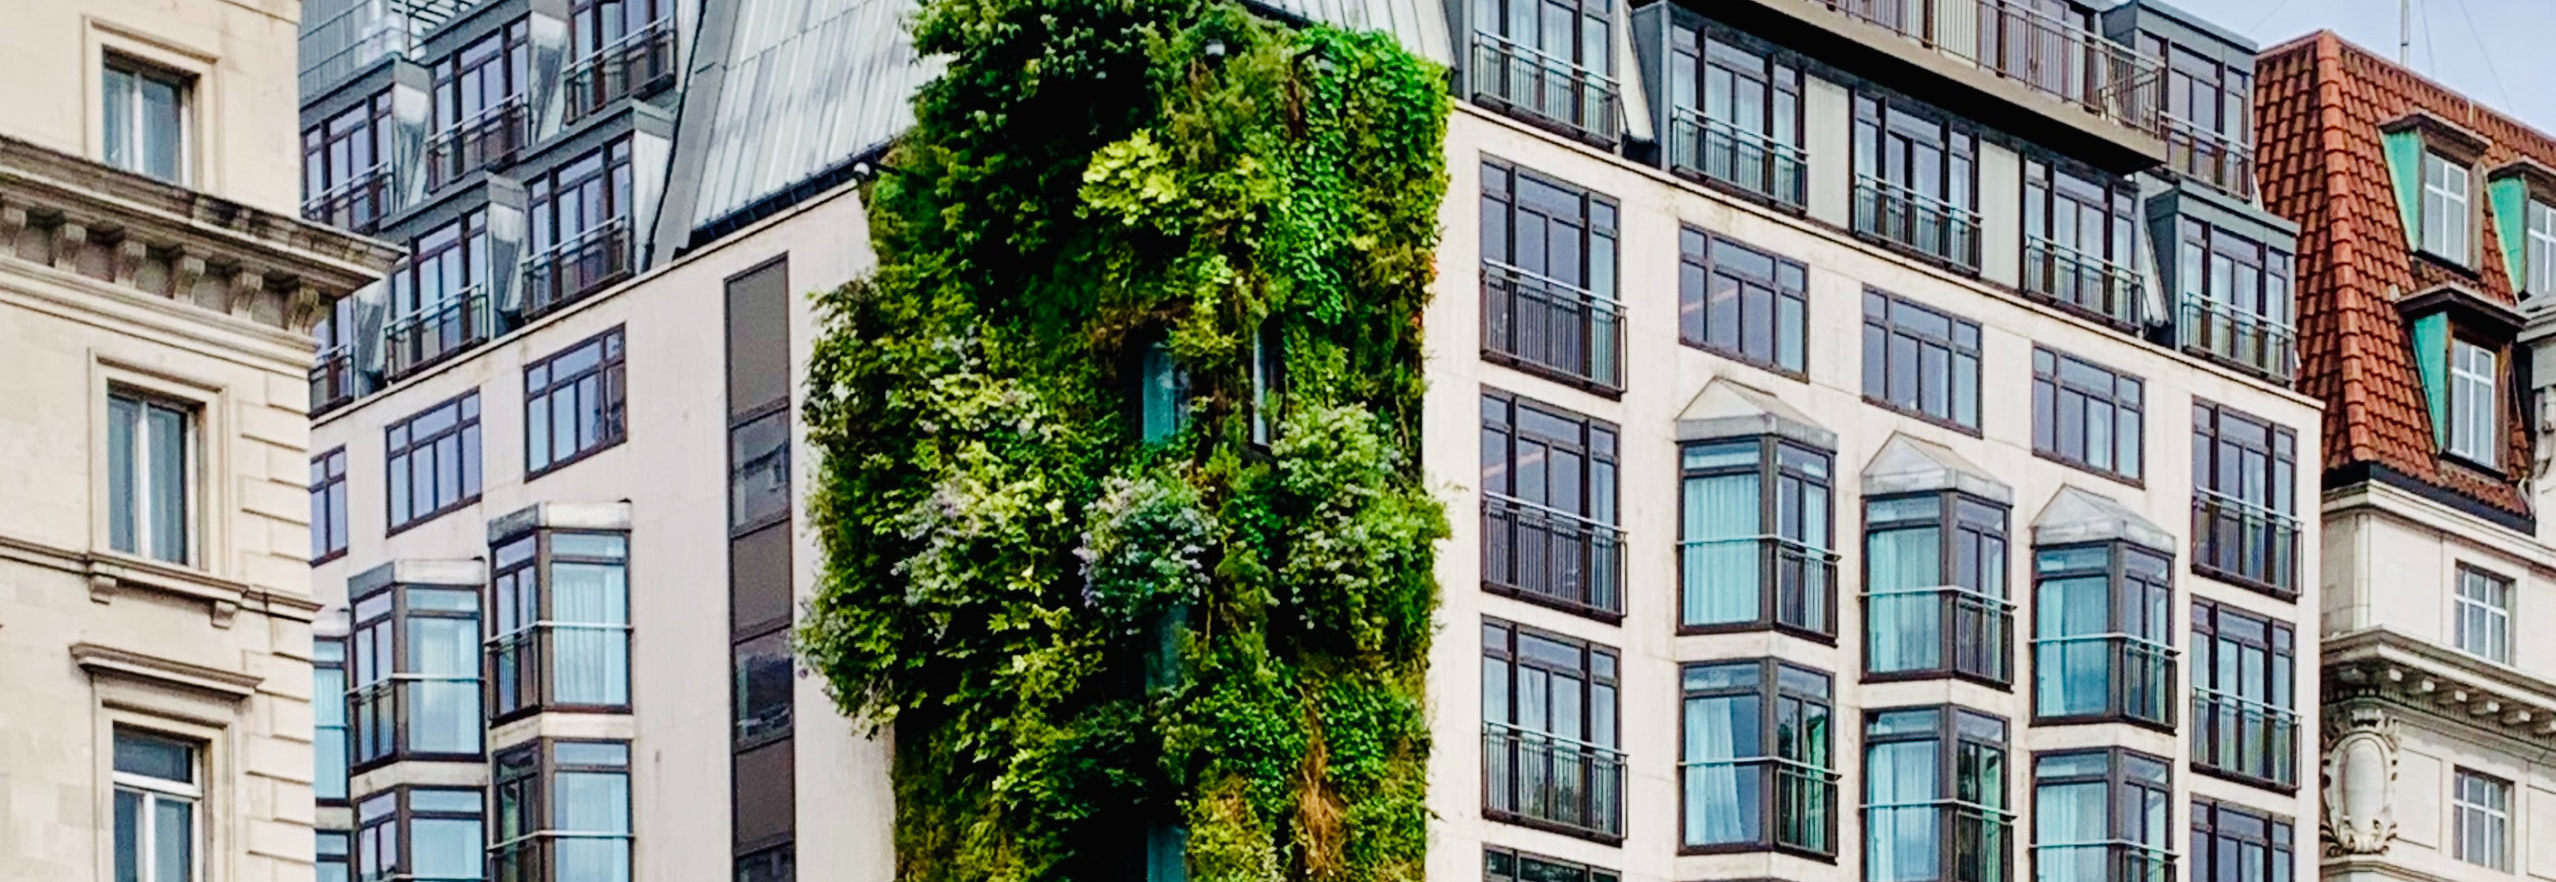 Green wall installation on the side of a building